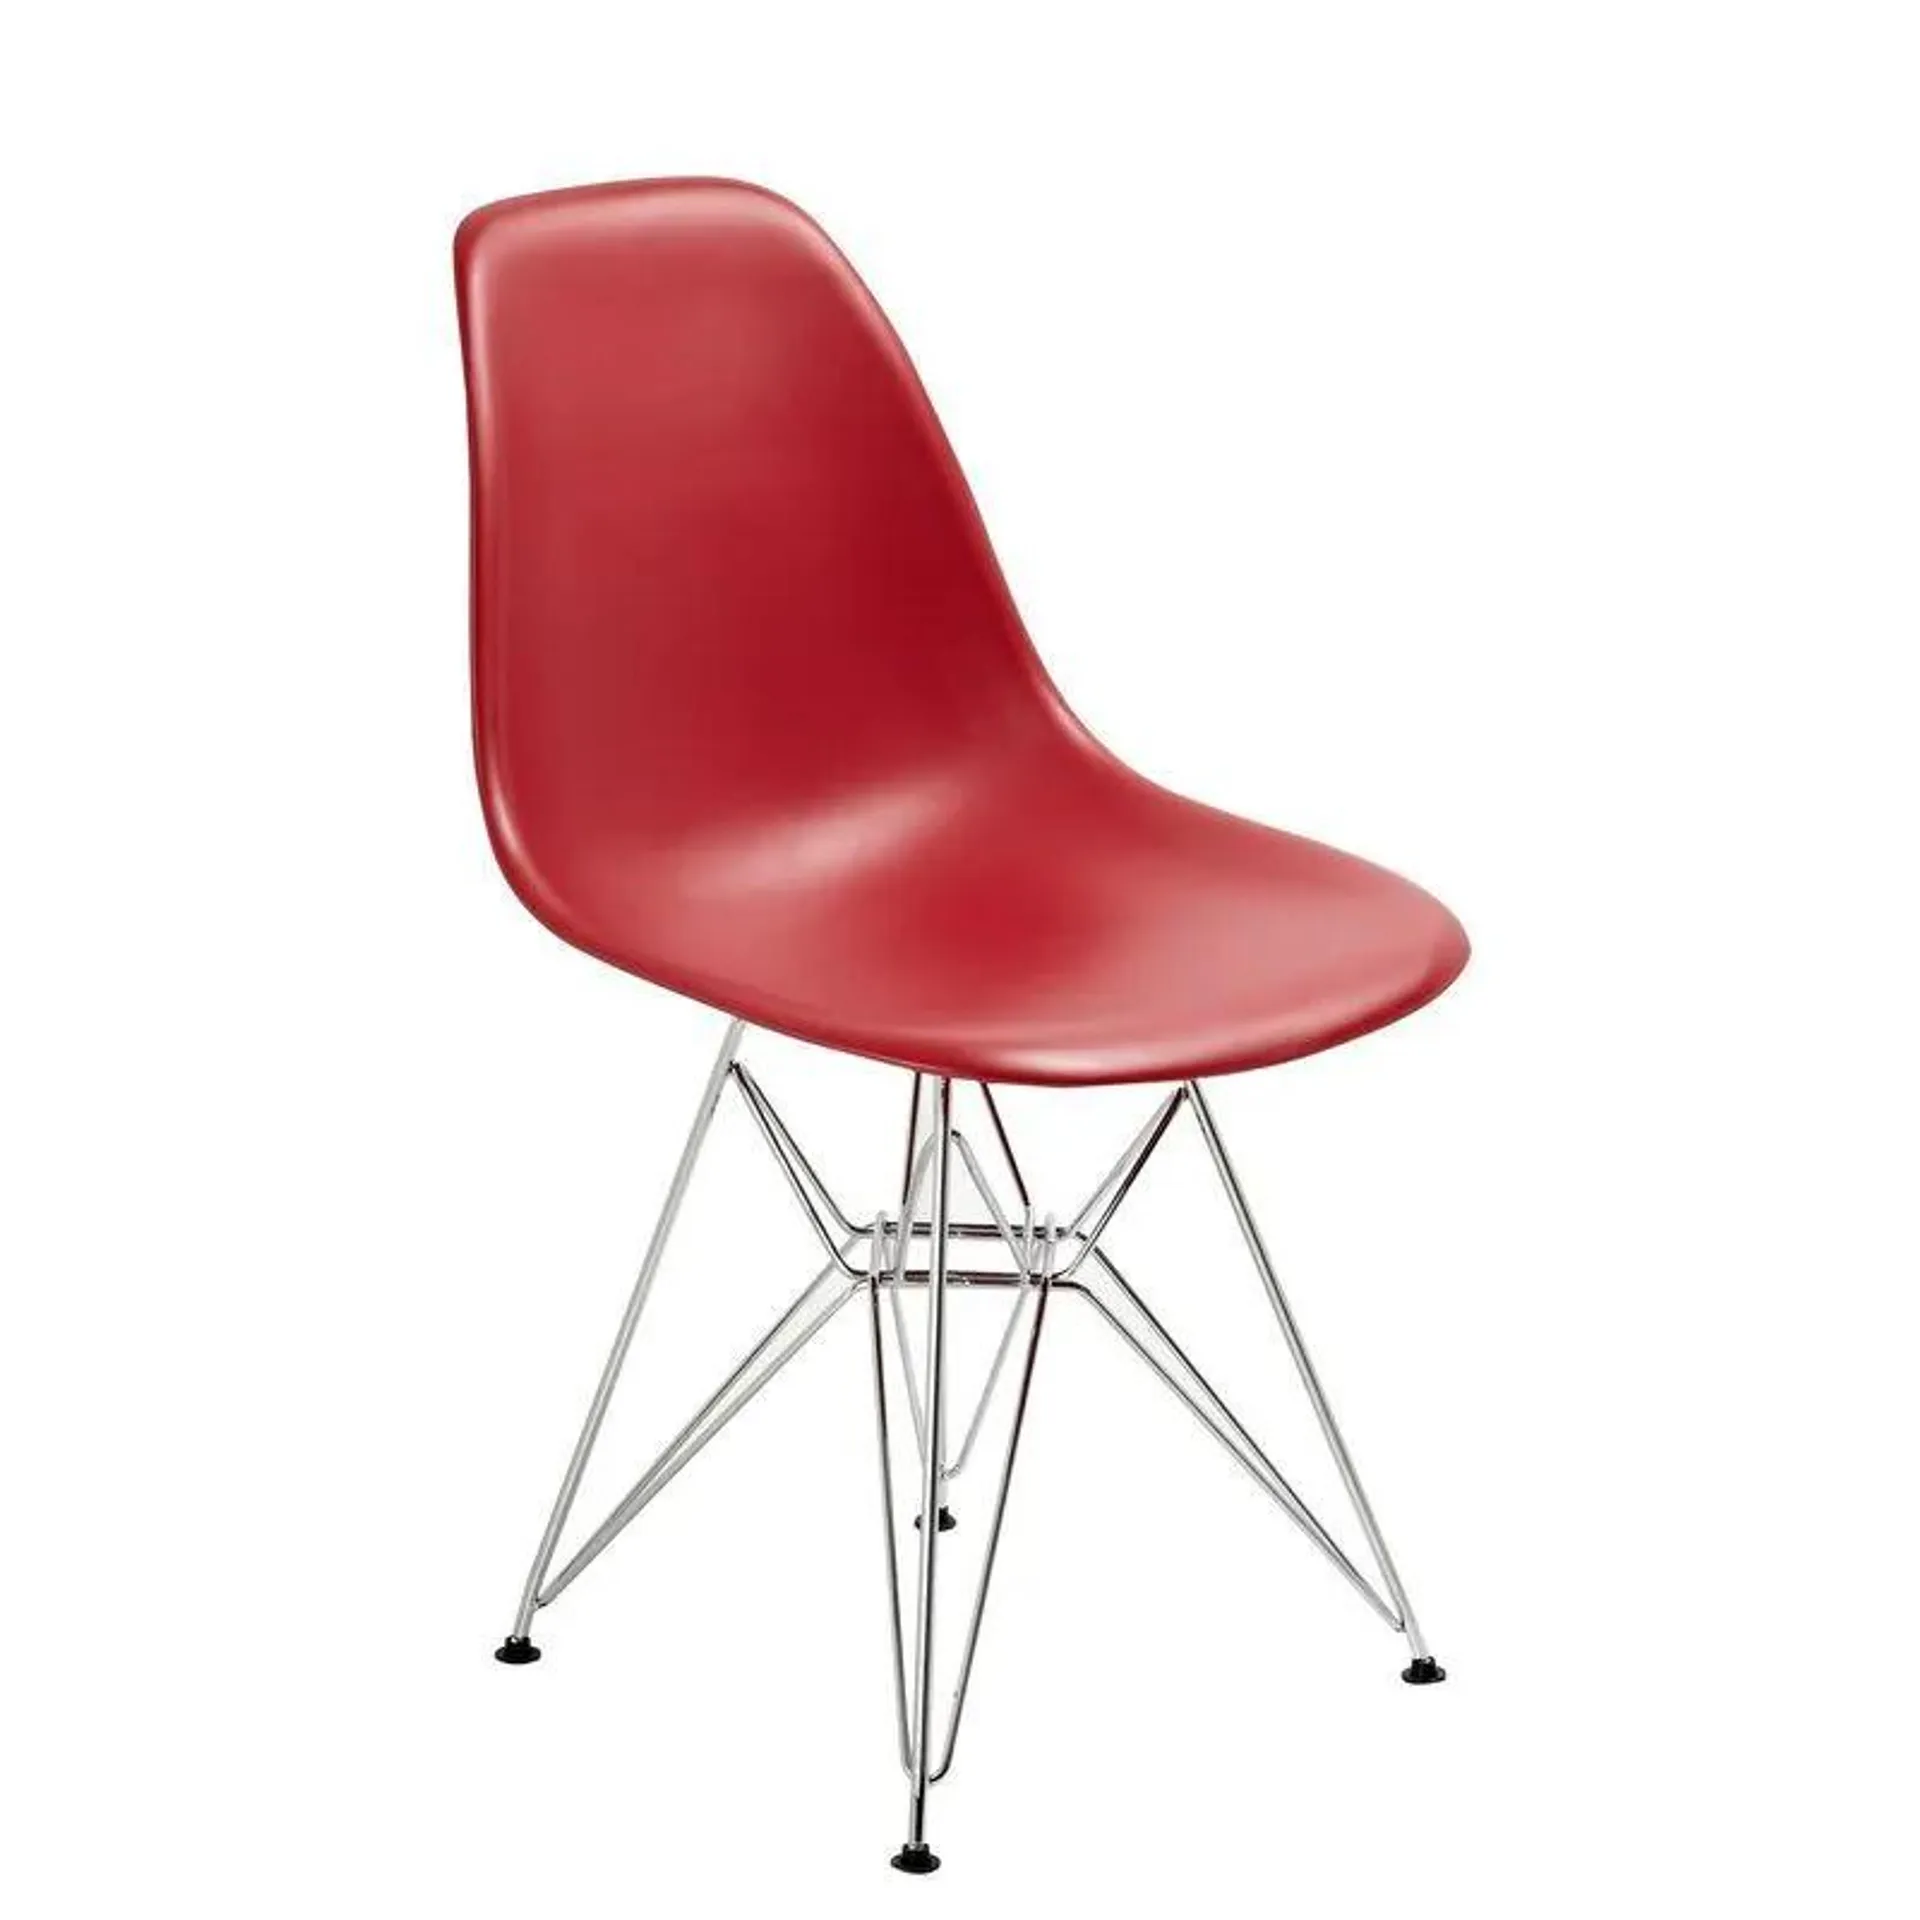 Louie 21 Inch Modern Side Chair, Chrome Finished Legs, Striking Red Finish-Benzara